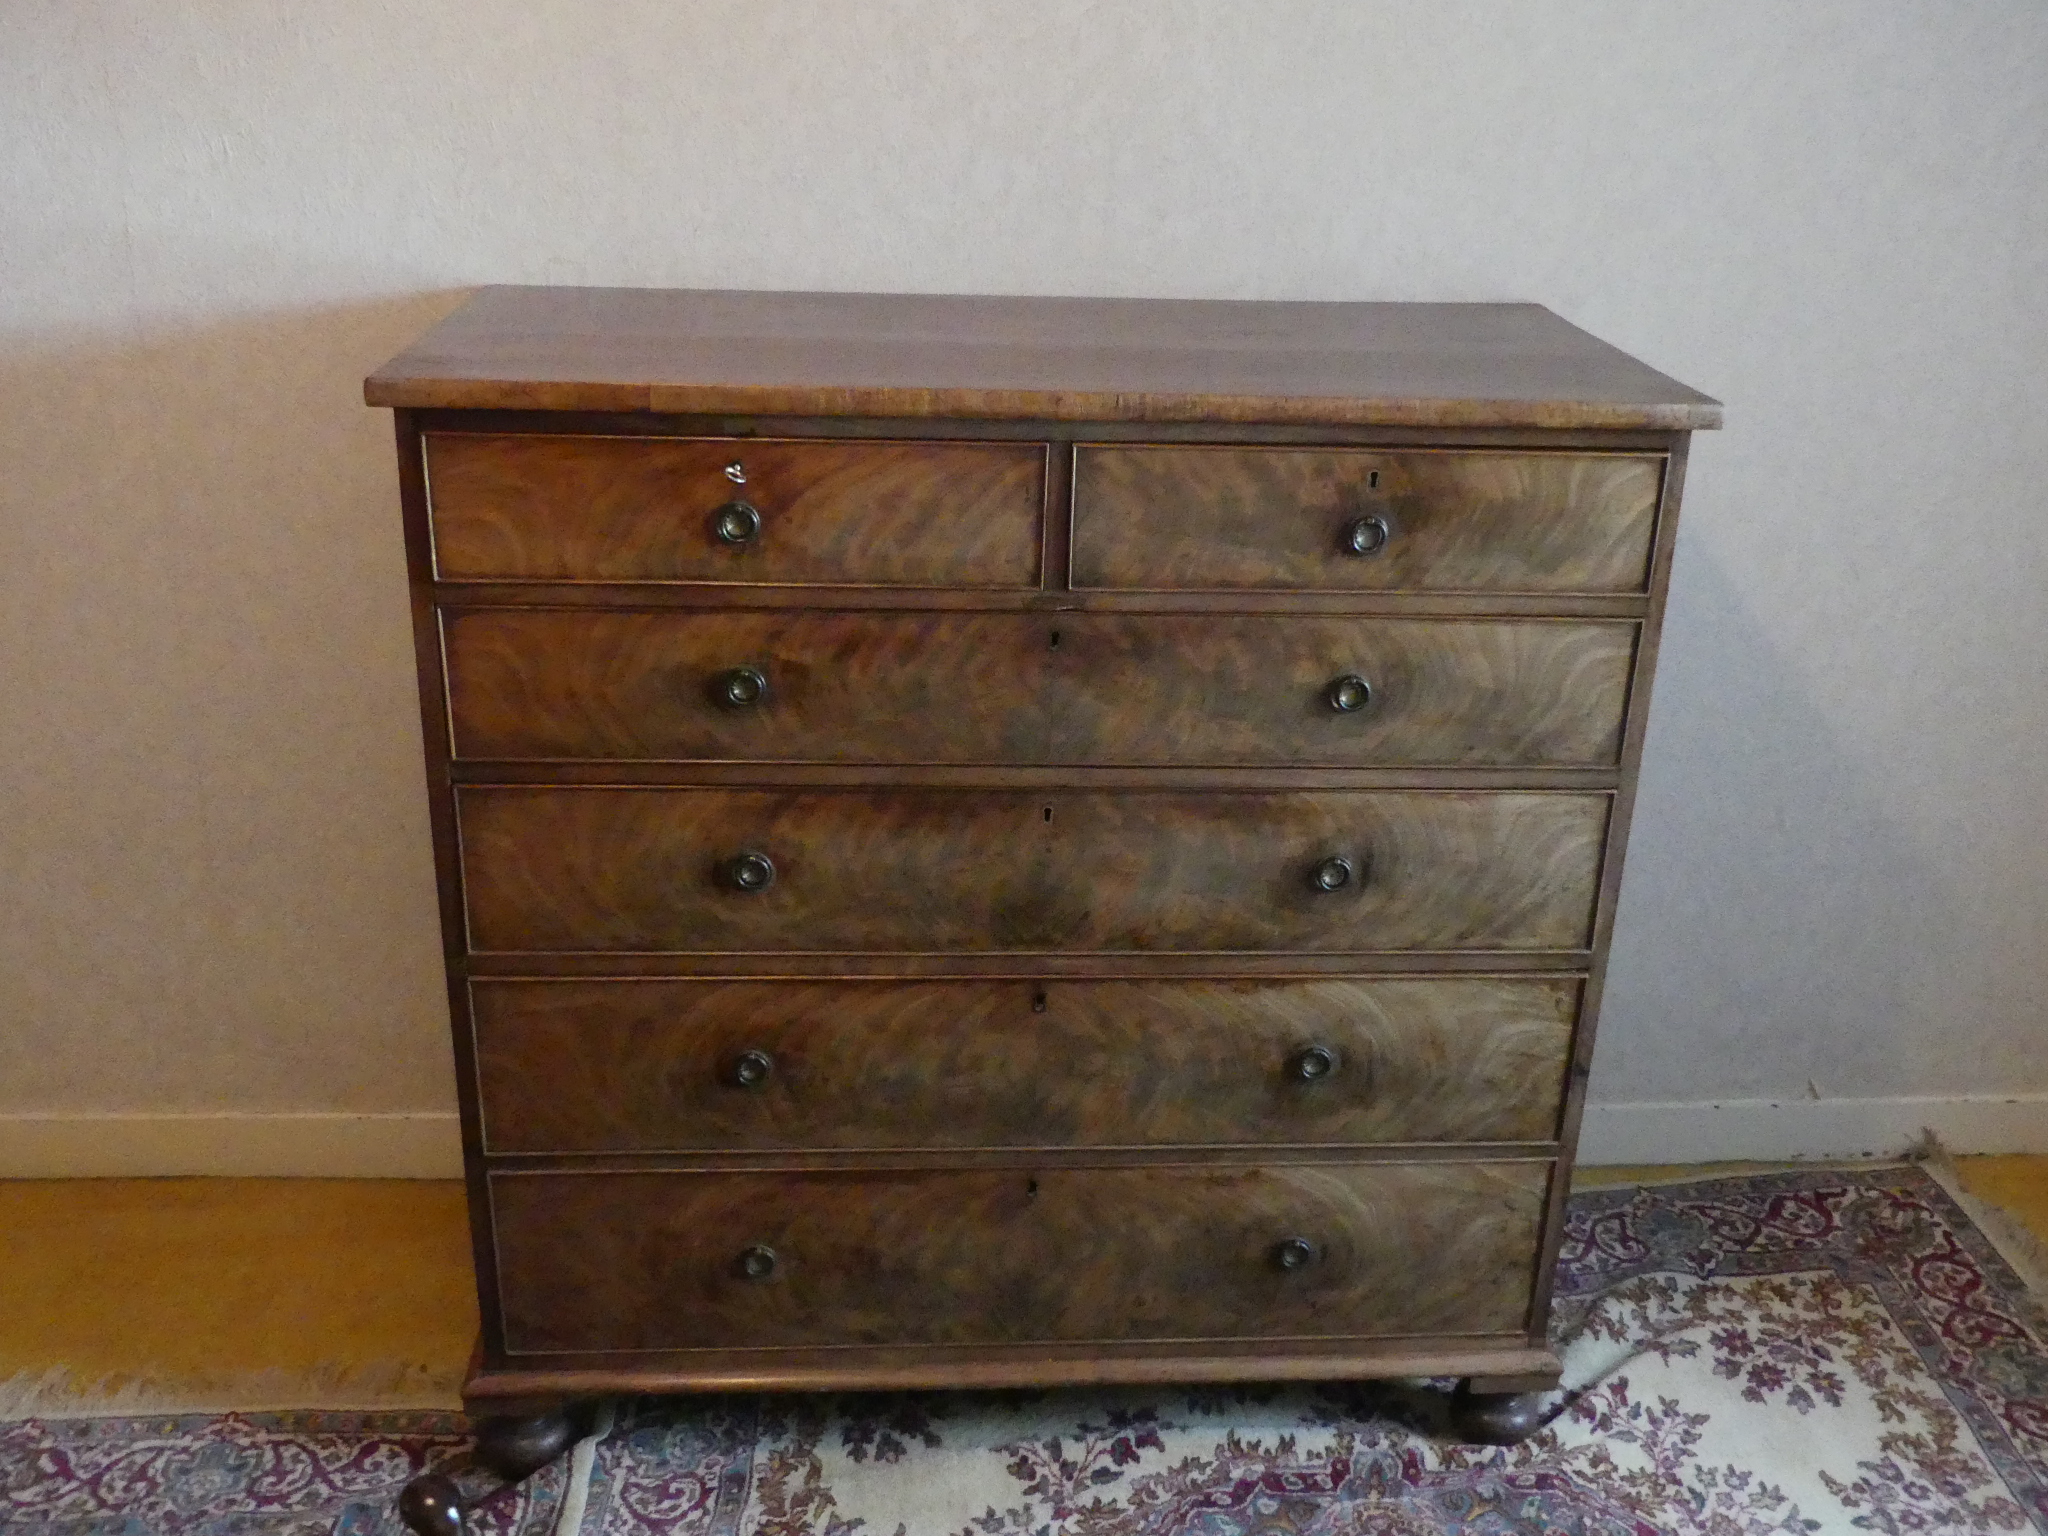 An antique Chest of Drawers, 46in (117cm) wide x 21in (53.25cm) deep x 47in (119.25cm) high.